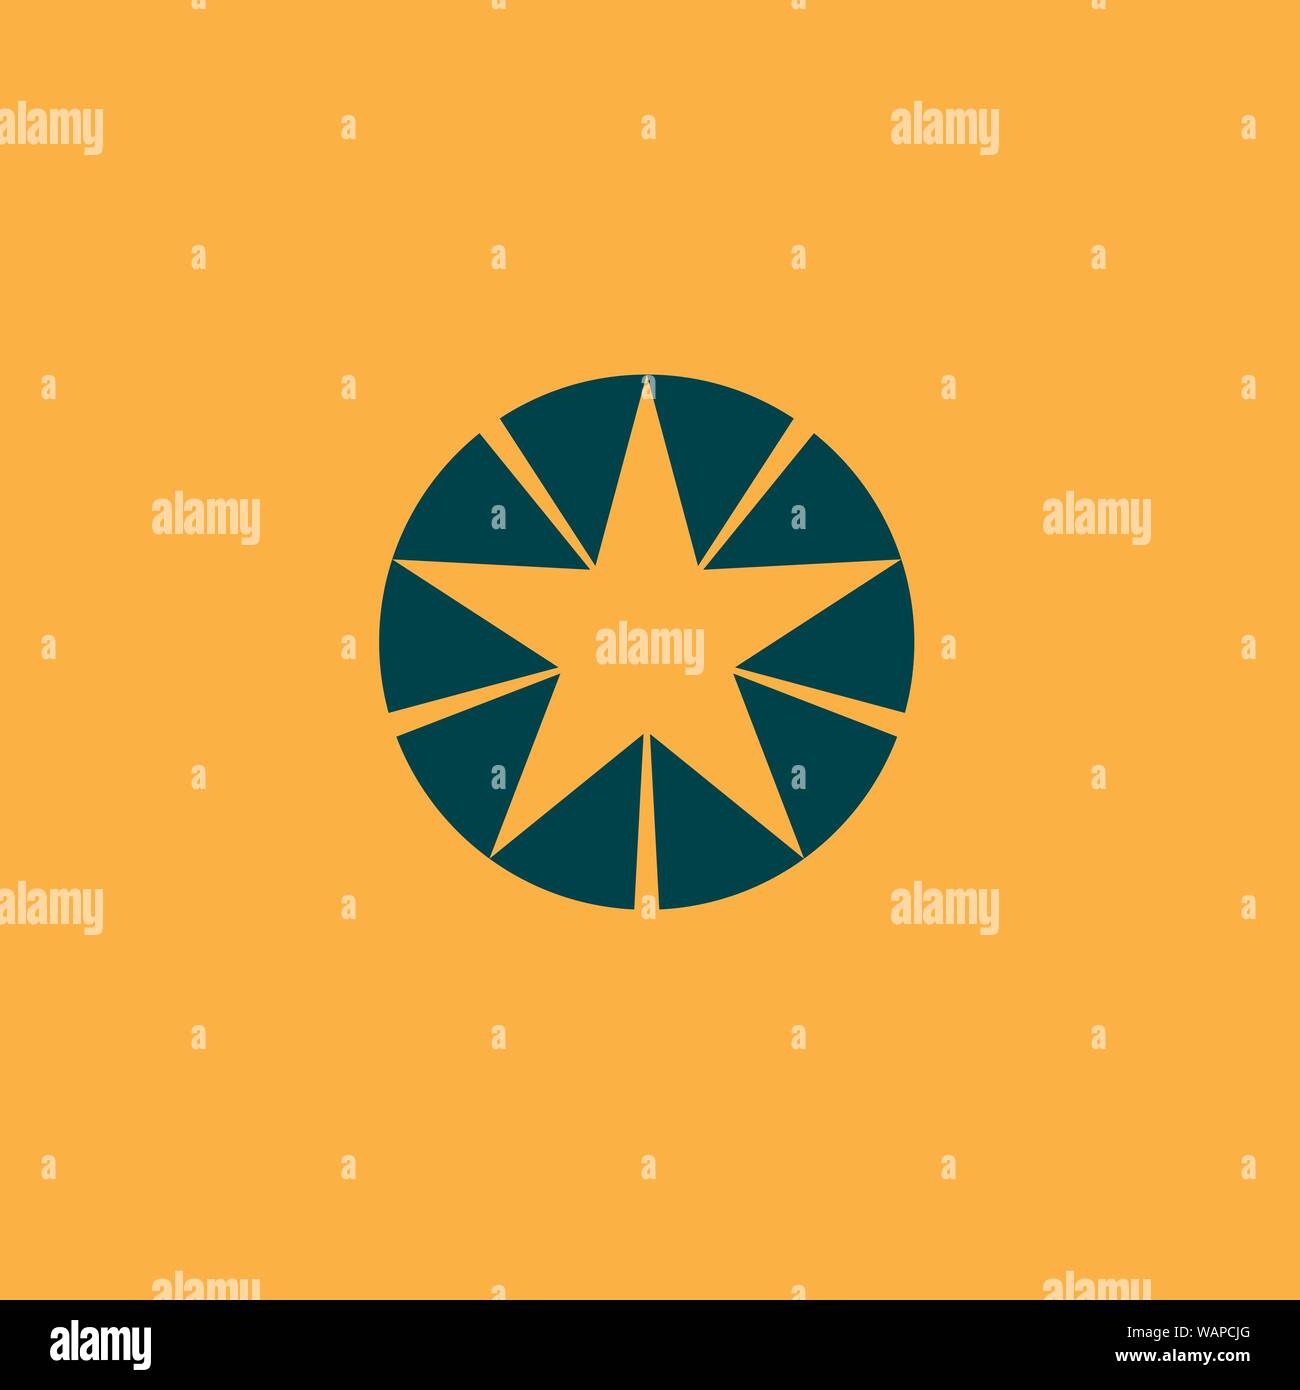 Star icon template design in round shape Stock Vector